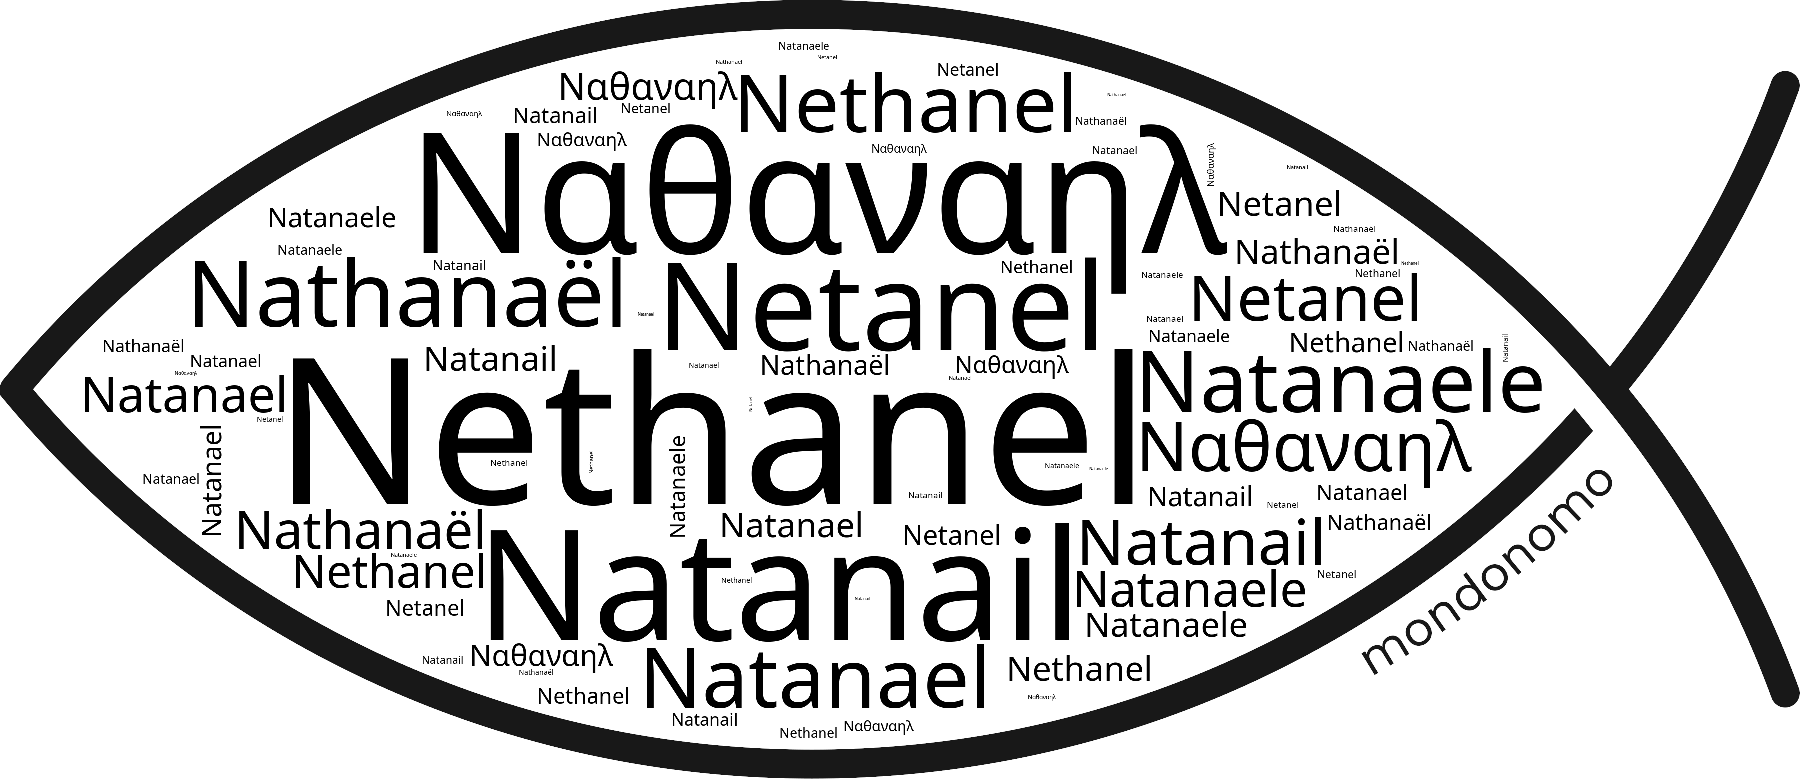 Name Nethanel in the world's Bibles